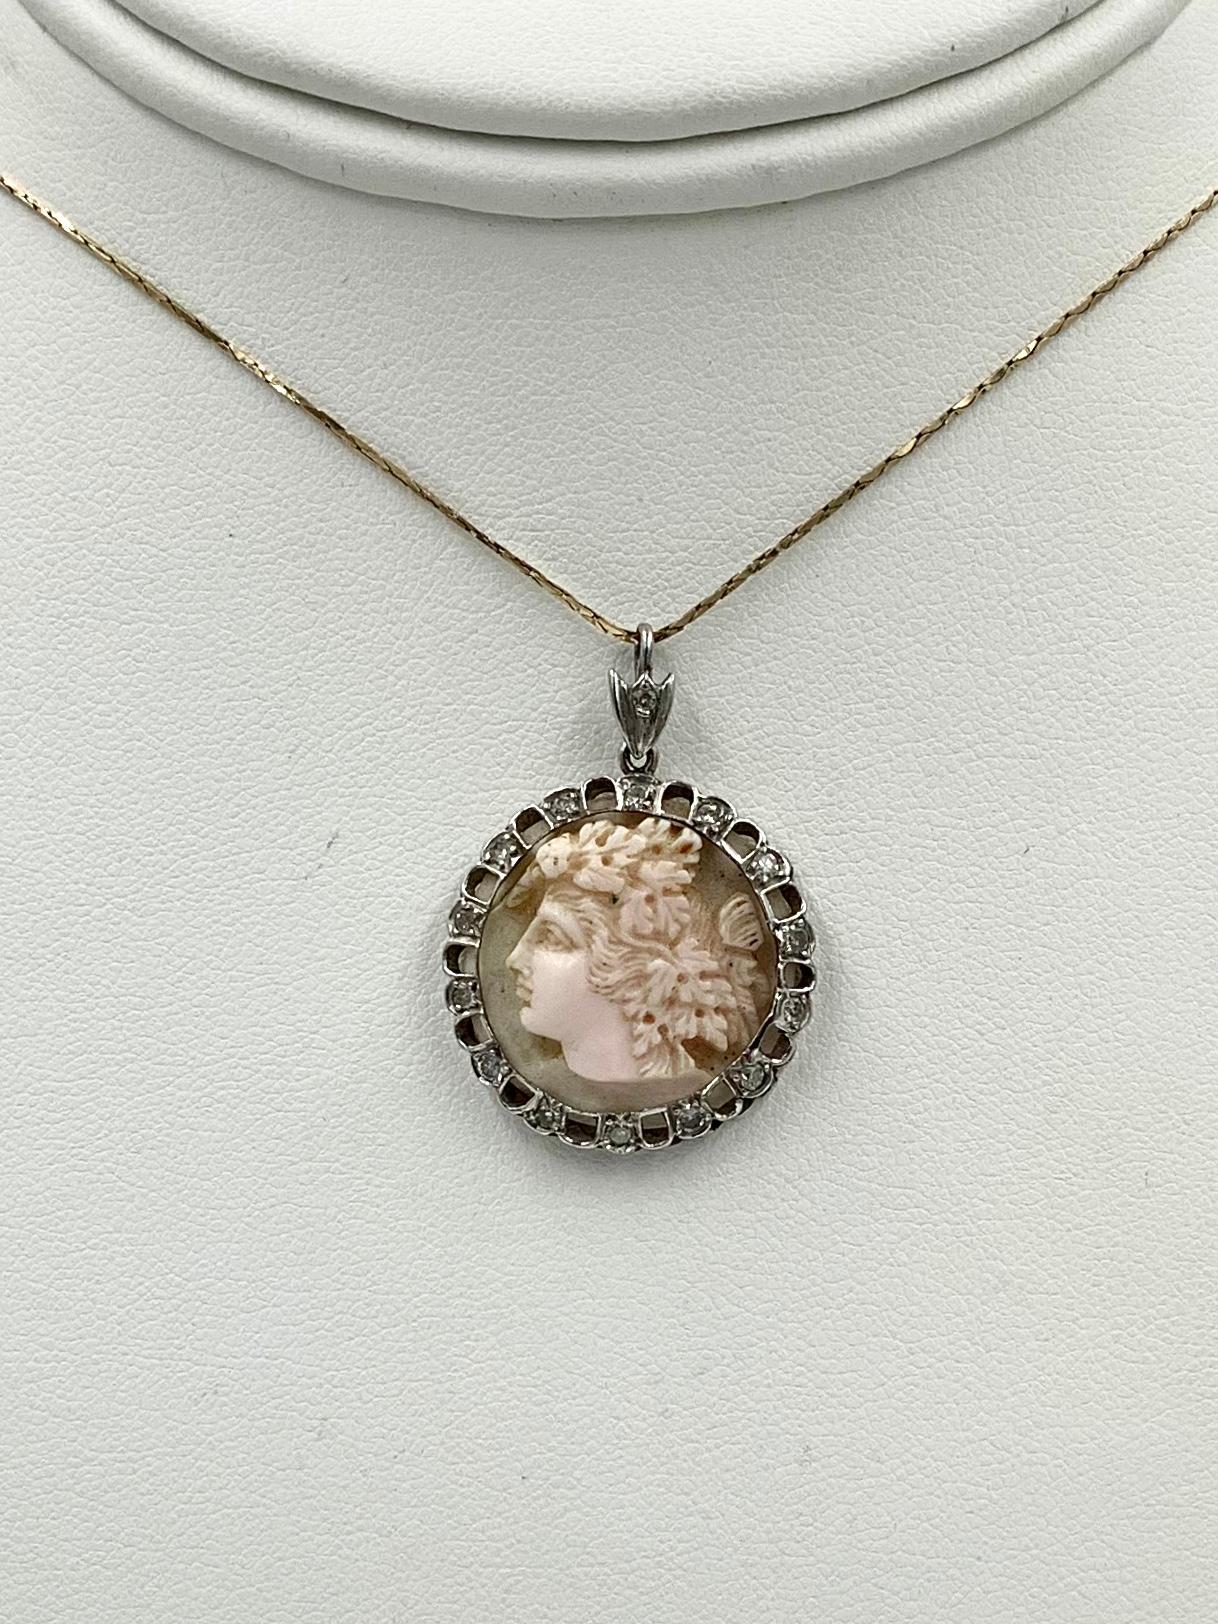 This is a stunning antique Victorian - Belle Epoque Pendant of a magnificent hand carved face of Bacchus, also known as Dionysus.  The stunning carved face is set in a platinum open work surround with 14 gorgeous antique Diamonds with a Diamond set